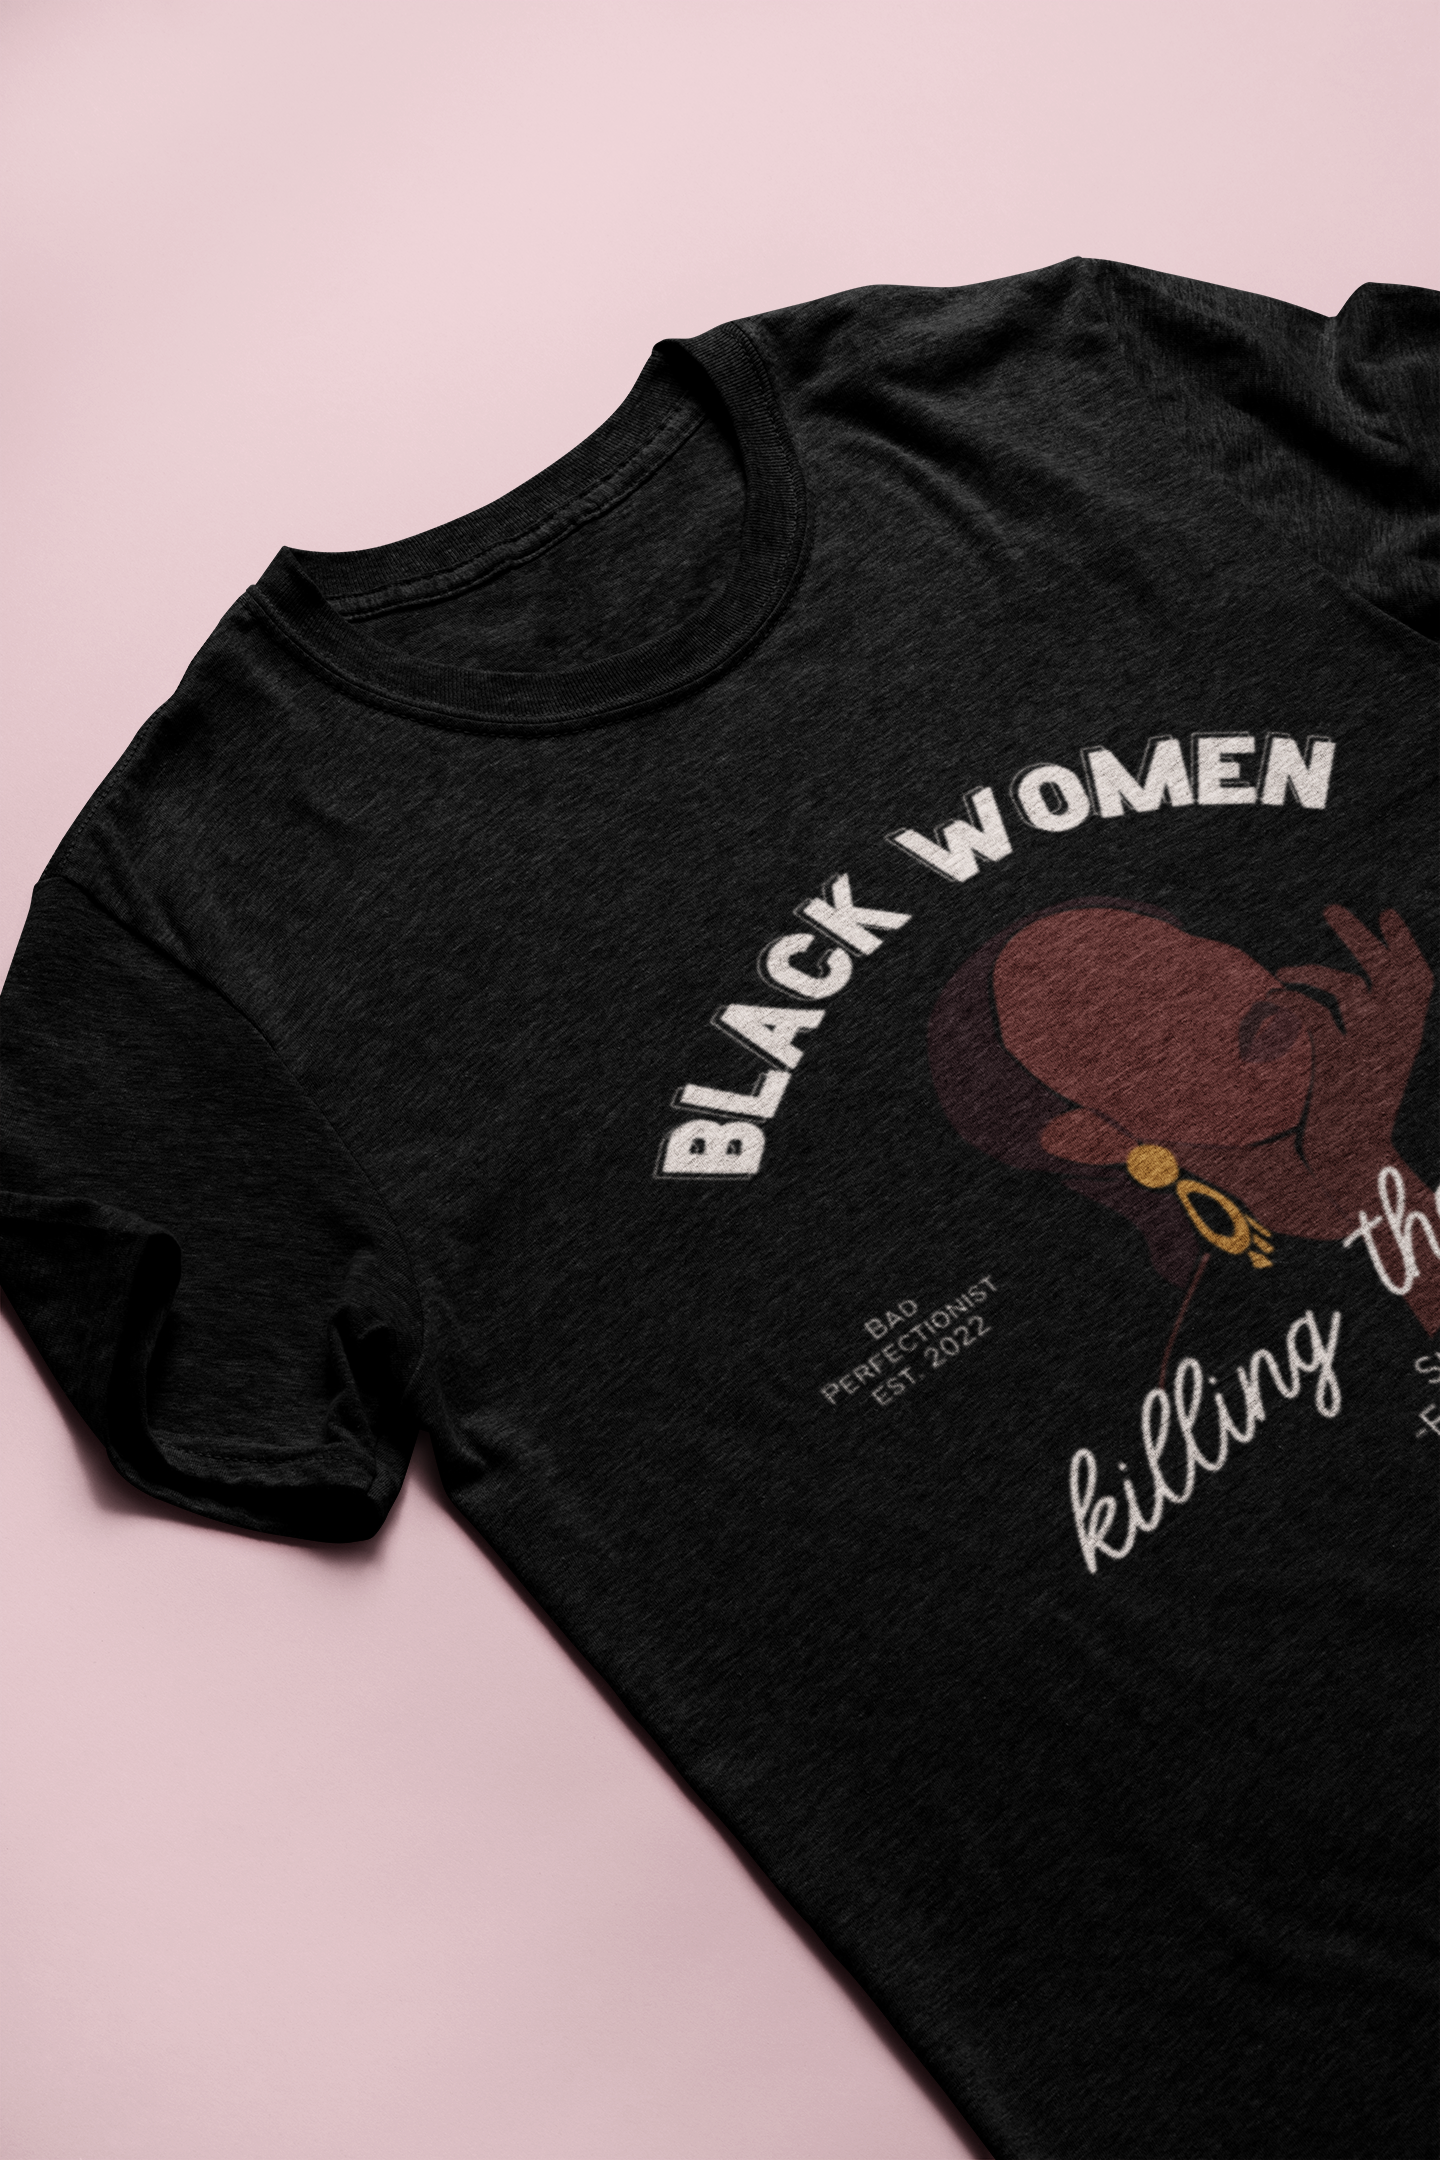 Black Women Killing The Game T Shirt - Bad Perfectionist Co.